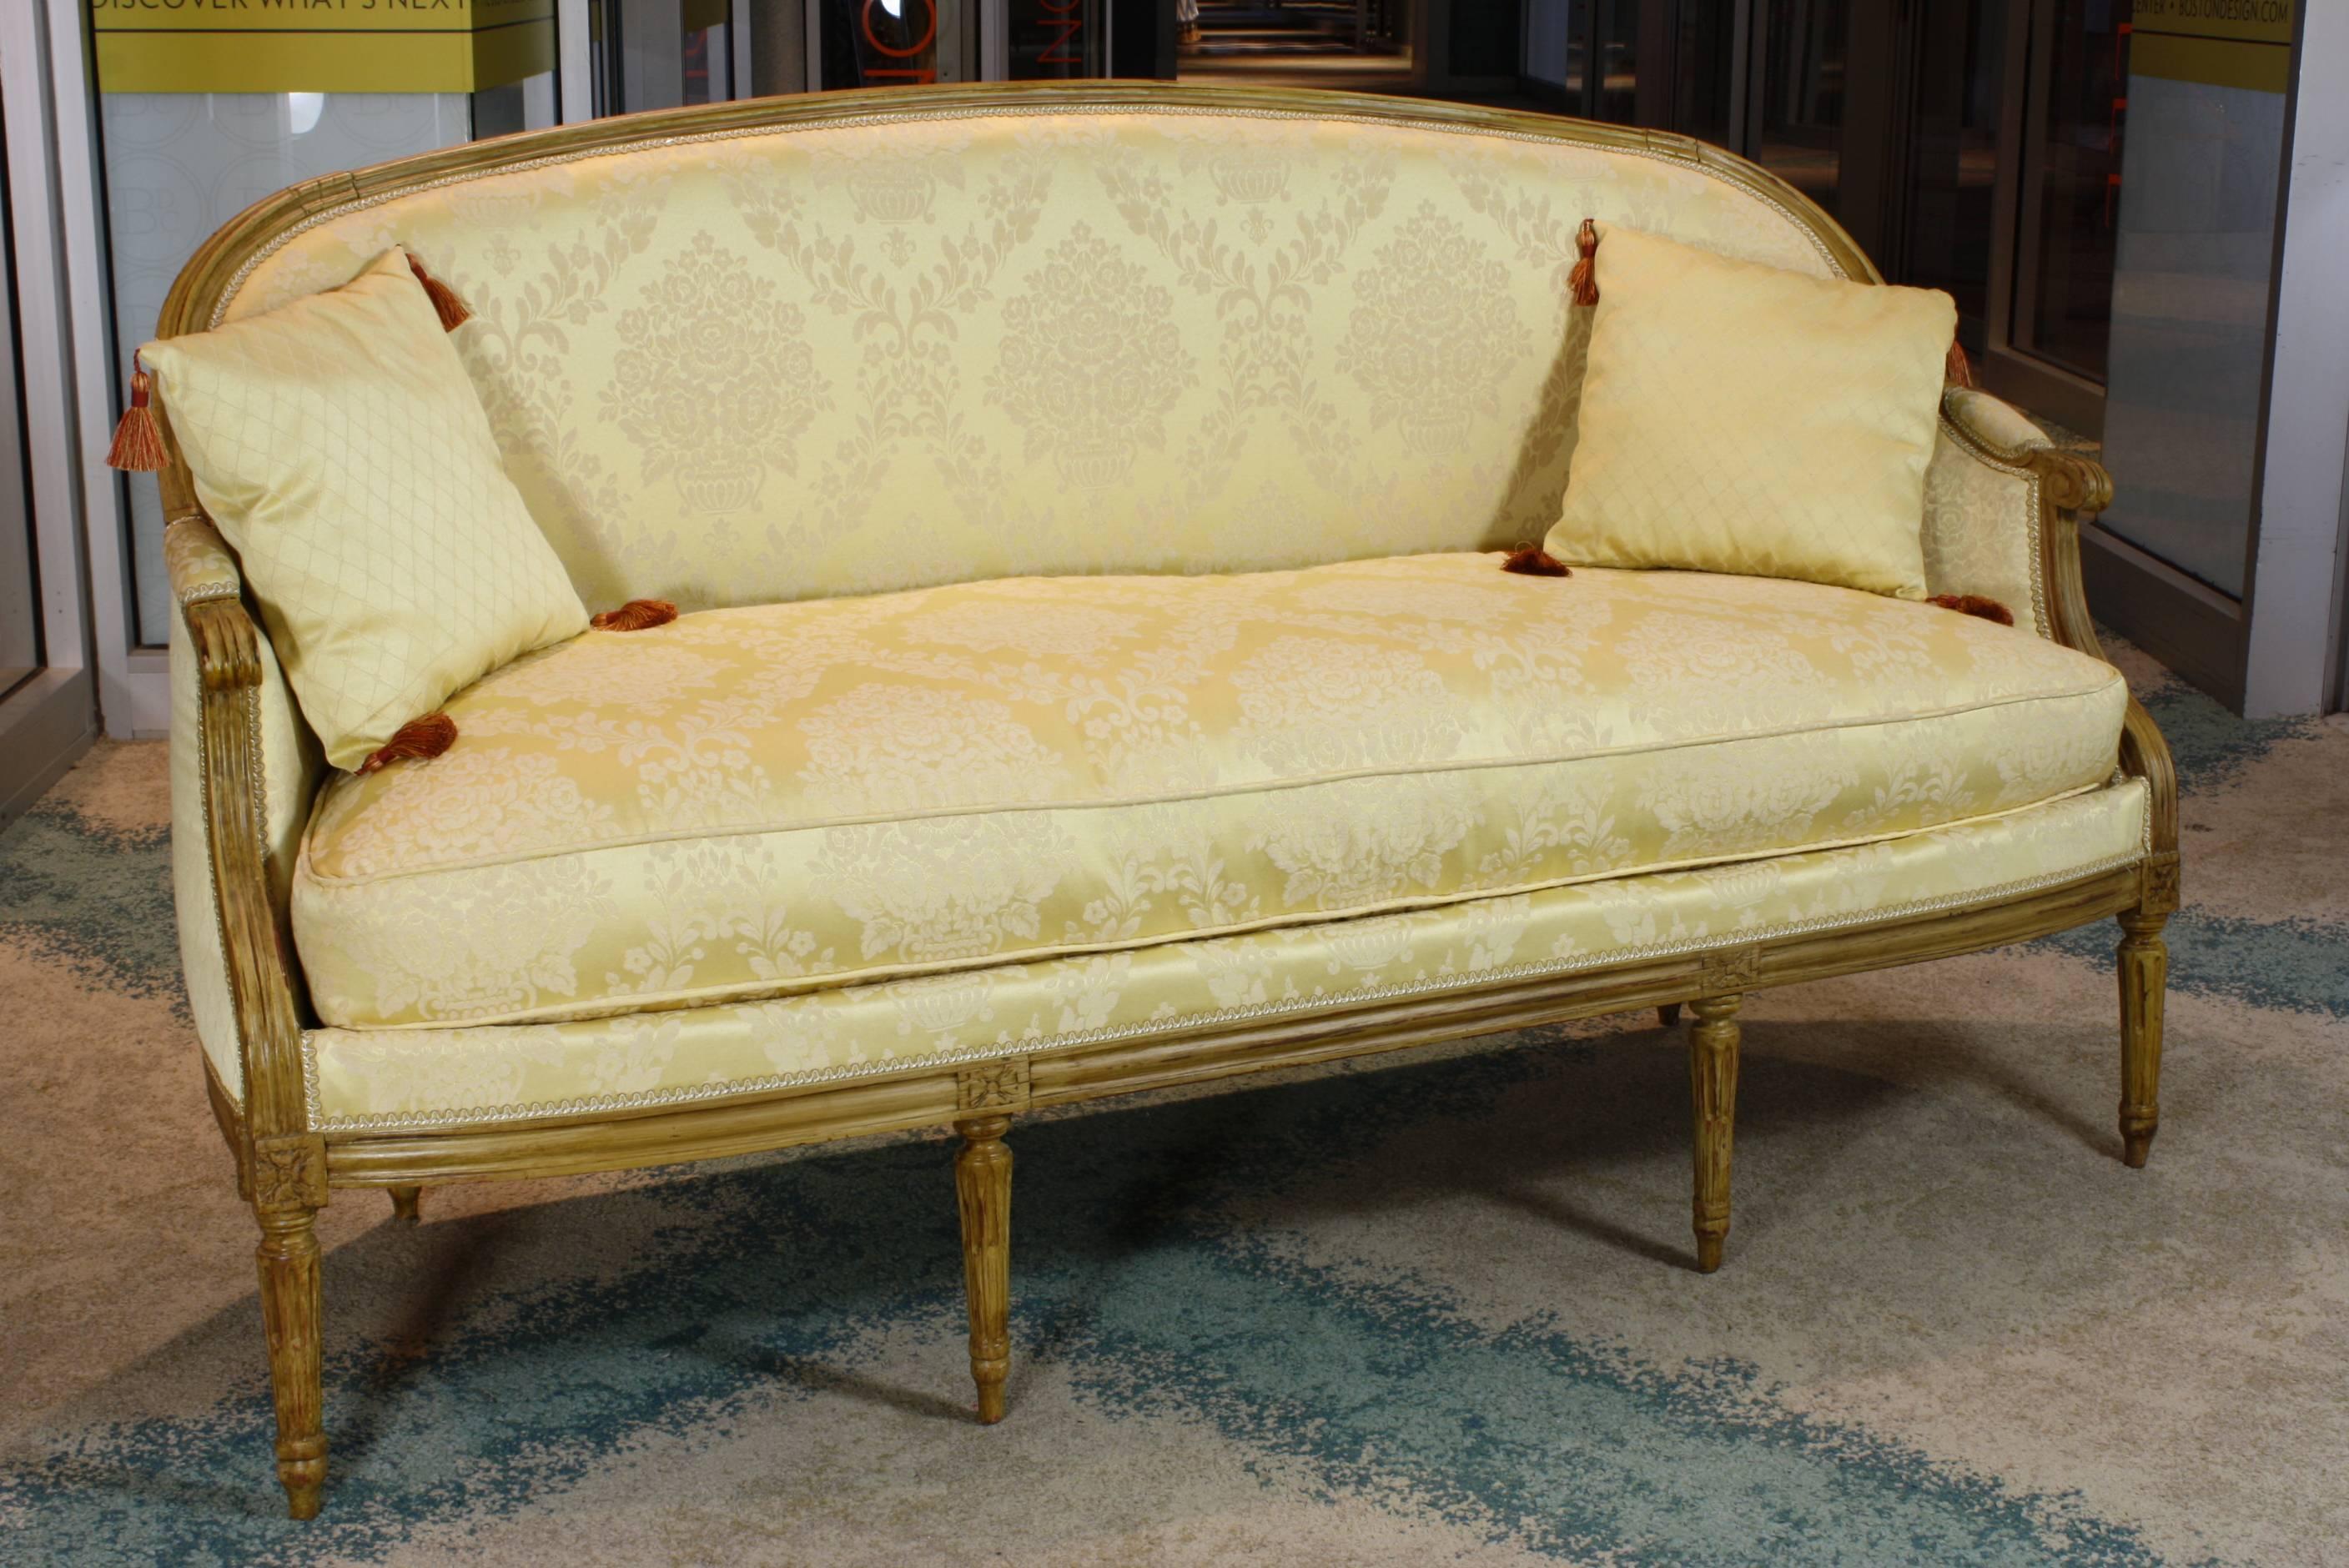 An elegant neoclassical Louis XVI period sofa or canapé, with down-stuffed separate seat cushion, two small tasseled pillows, painted frame, and tapered fluted legs.  Sofa has been mostly re-upholstered, with new trellice-patterned yellow fabric on